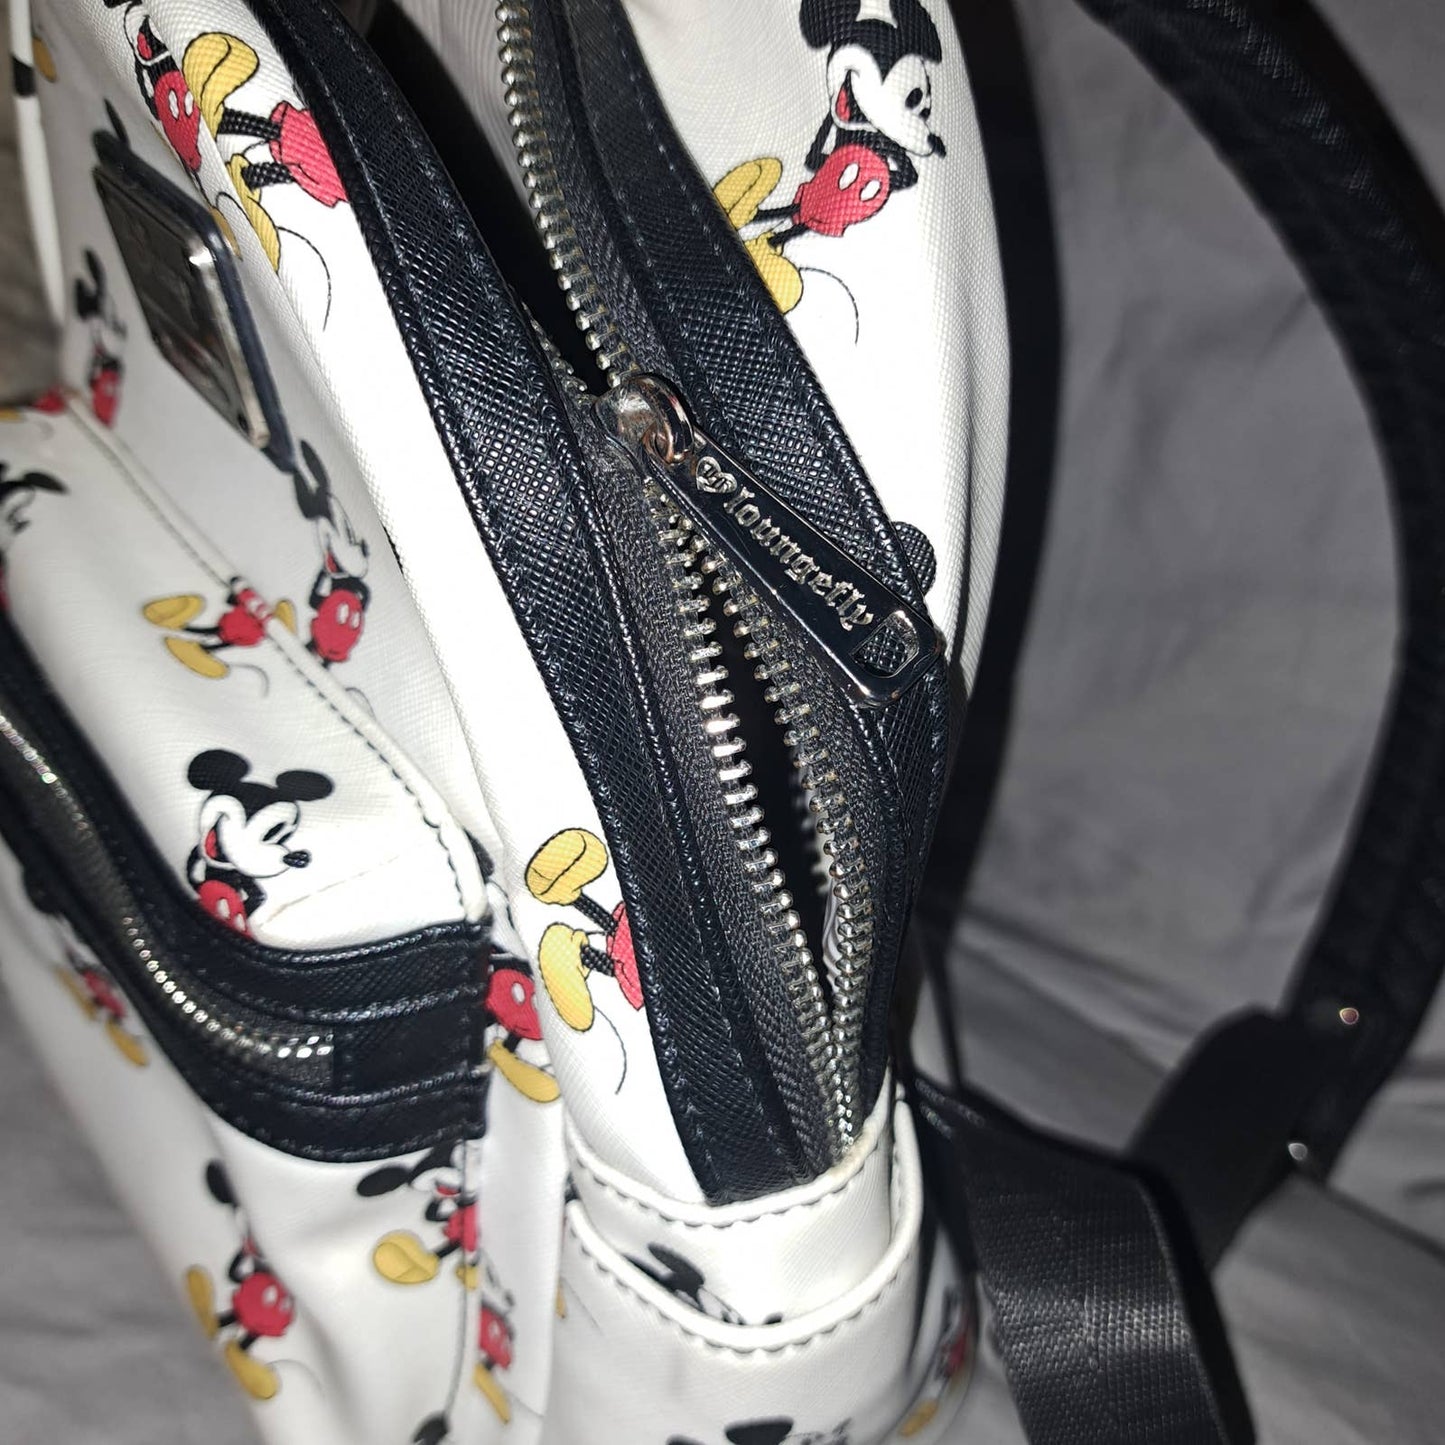 FUN and FABULOUS CLASSIC Mickey - LoungeFly Mini Backpack Pre-owned